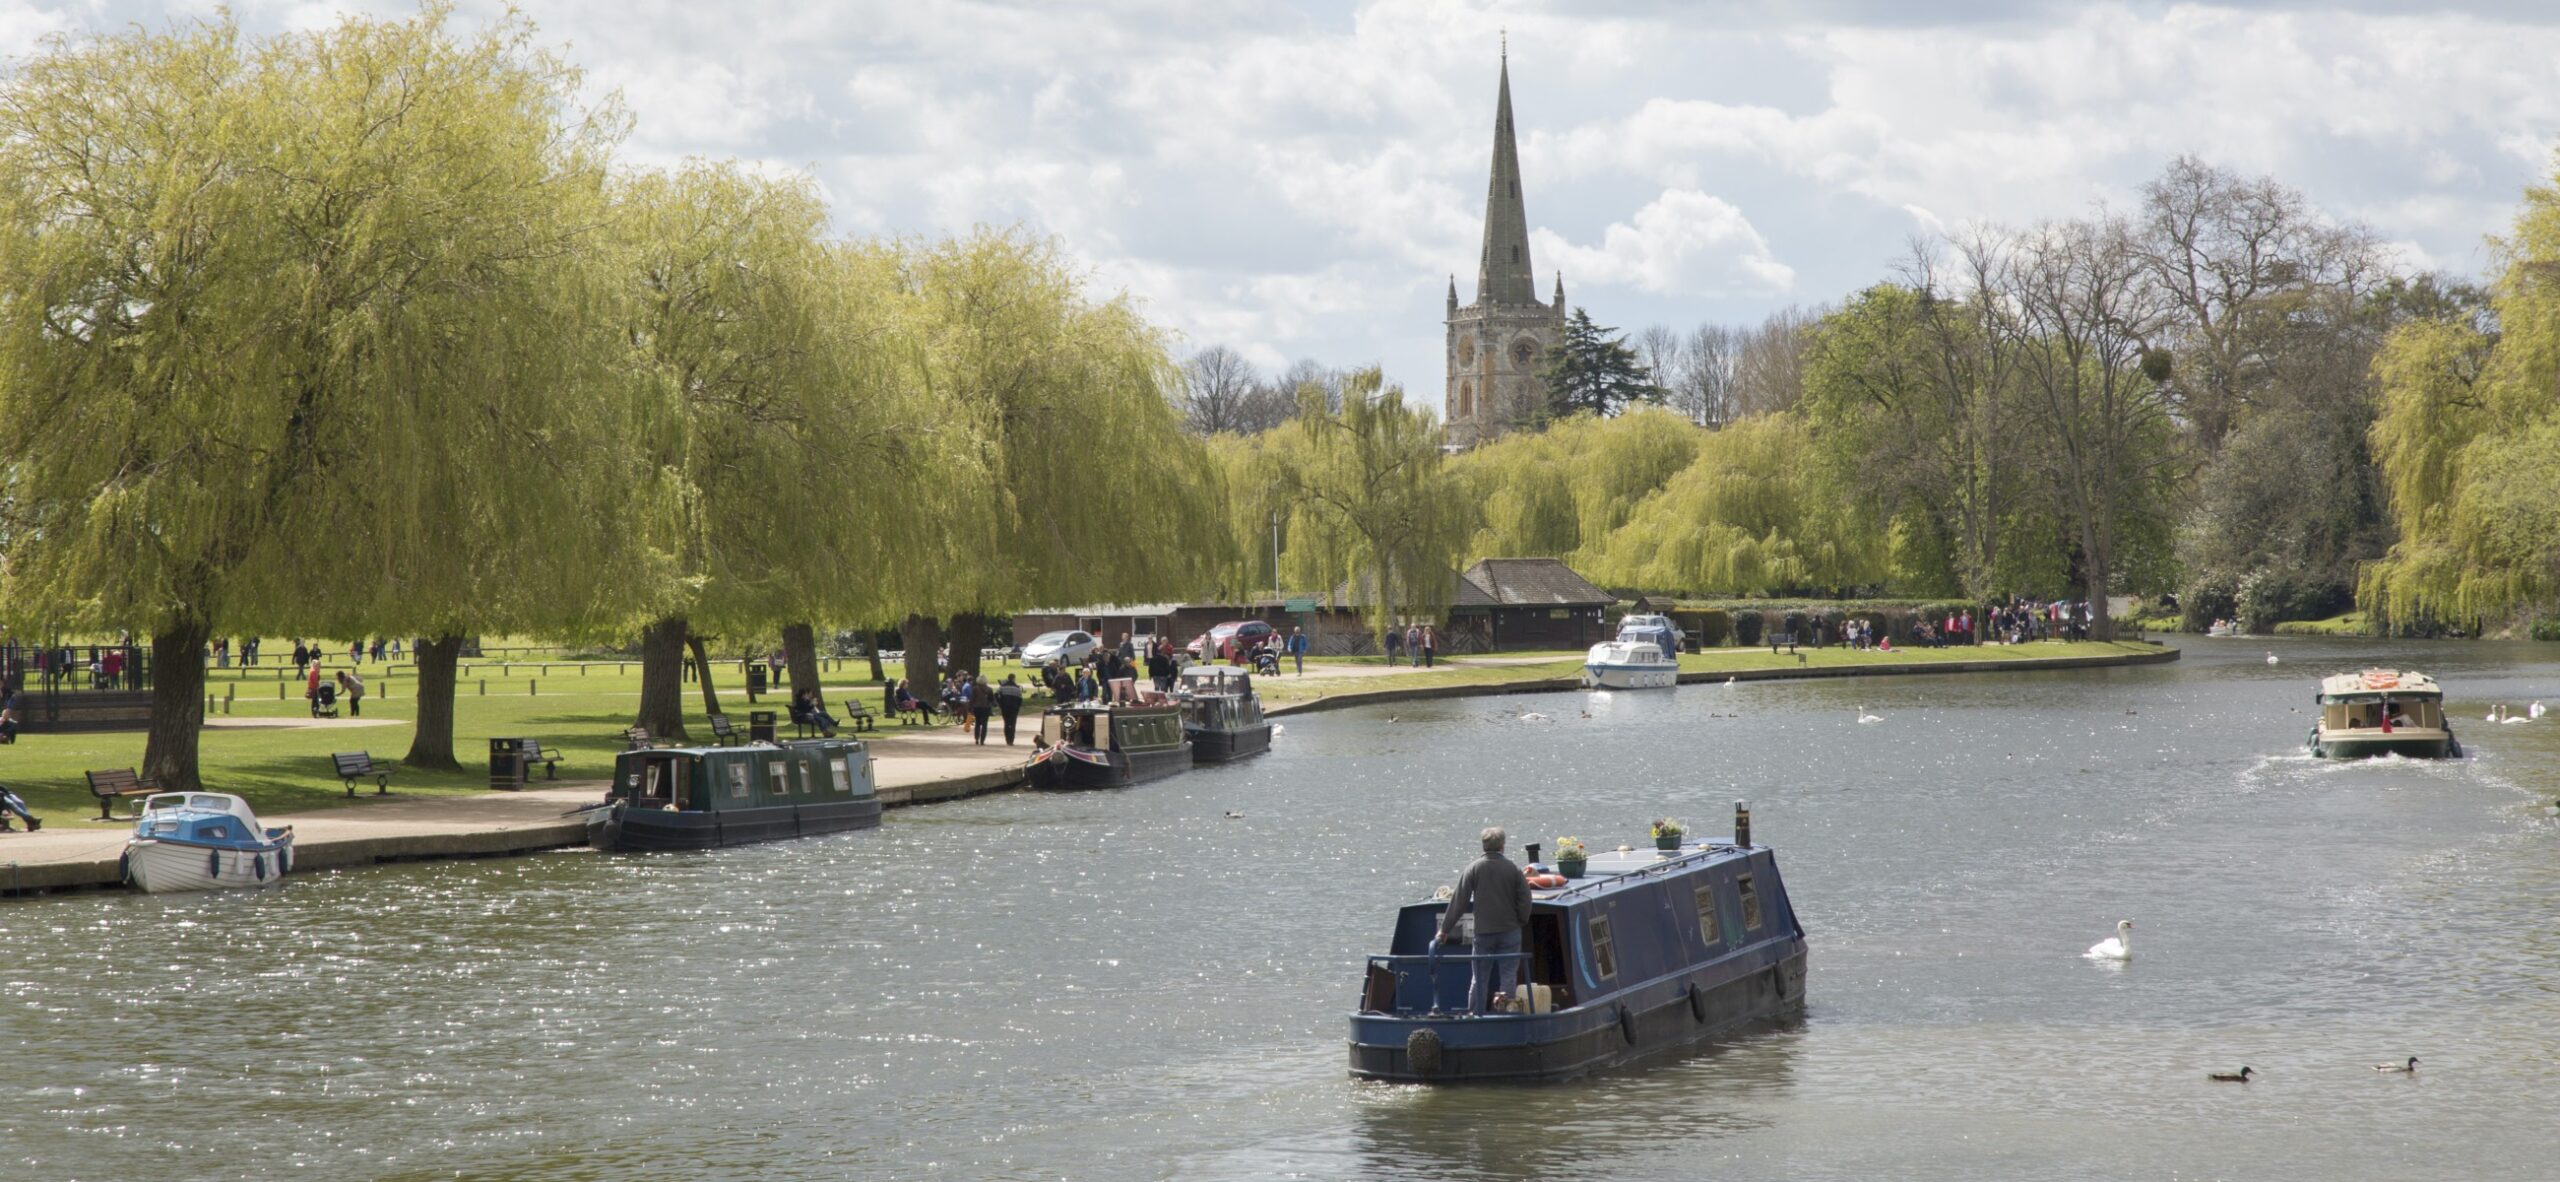 Stratford Upon Avon – Into Shakespeare’s Town: Top Things to Do